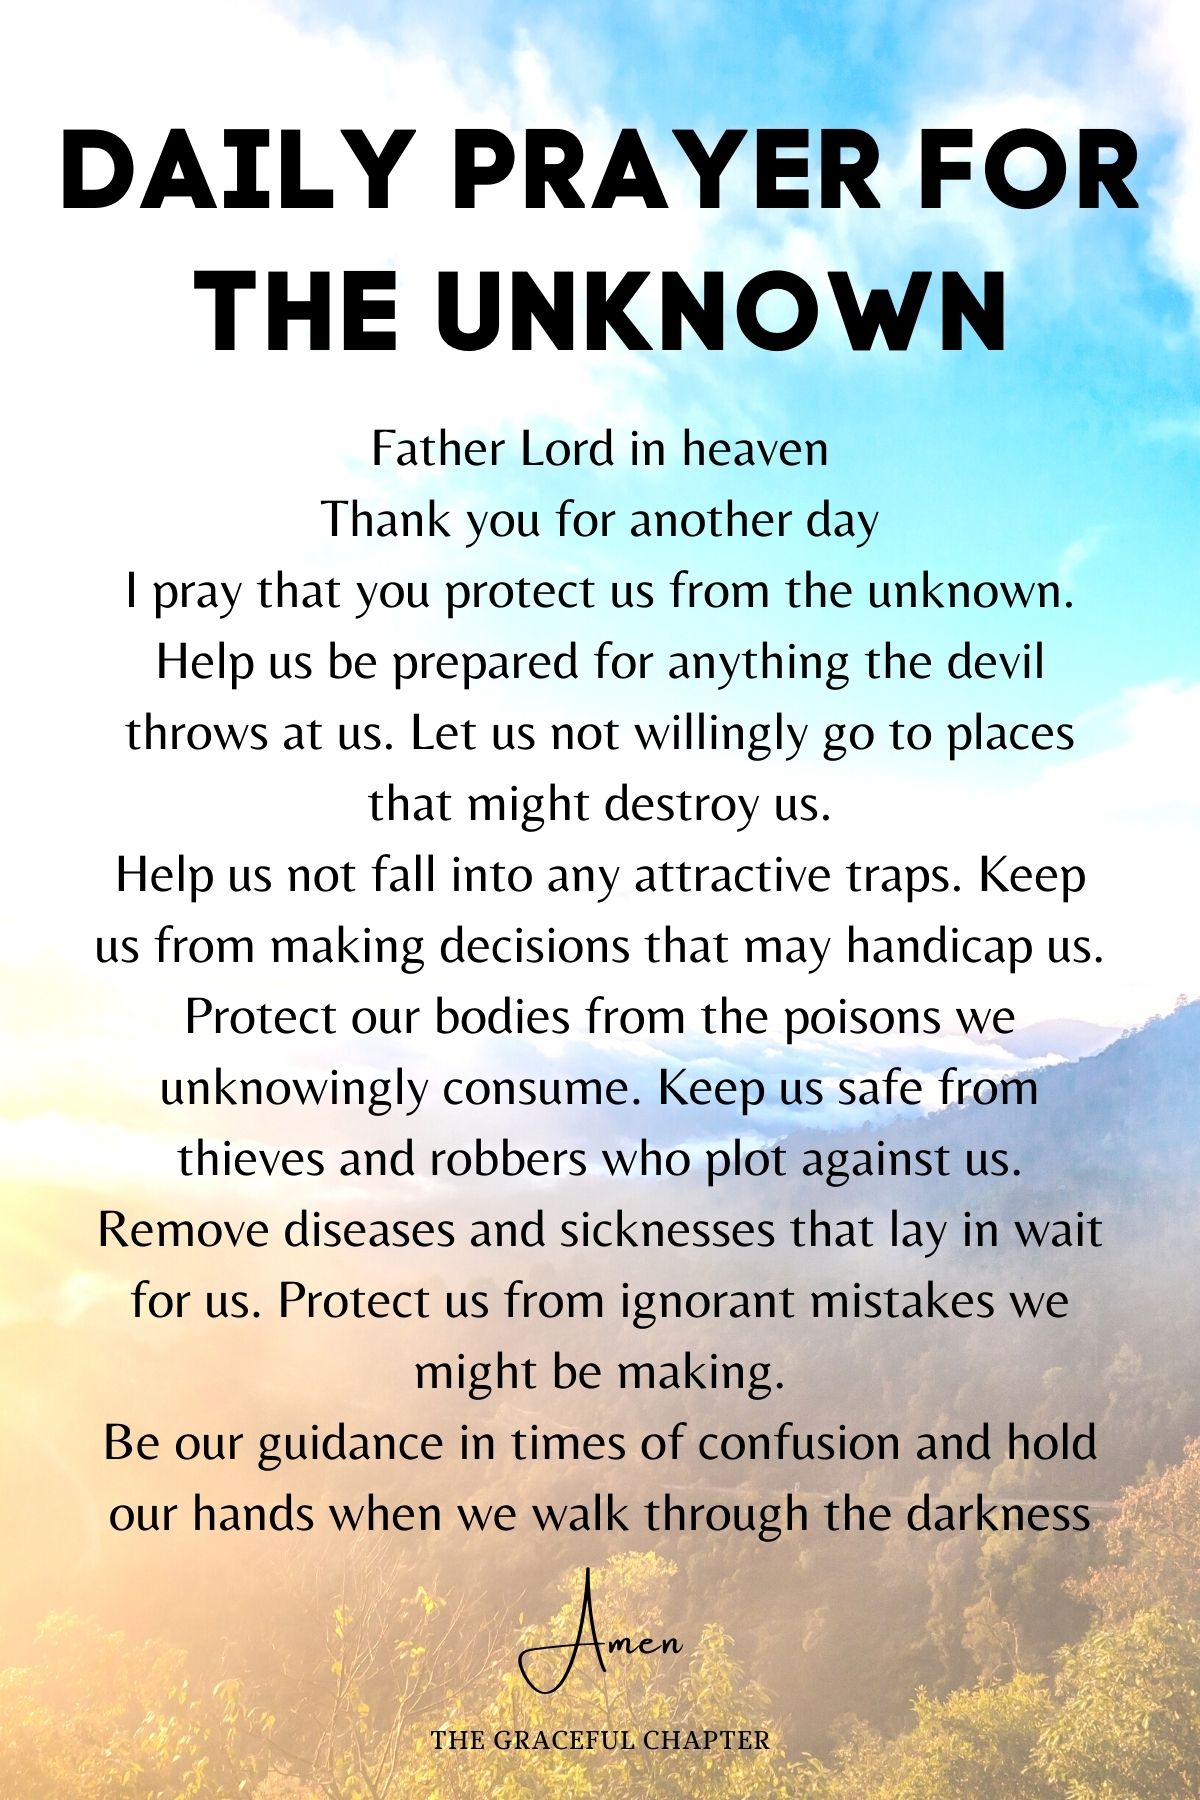 Daily Prayer for the Unknown